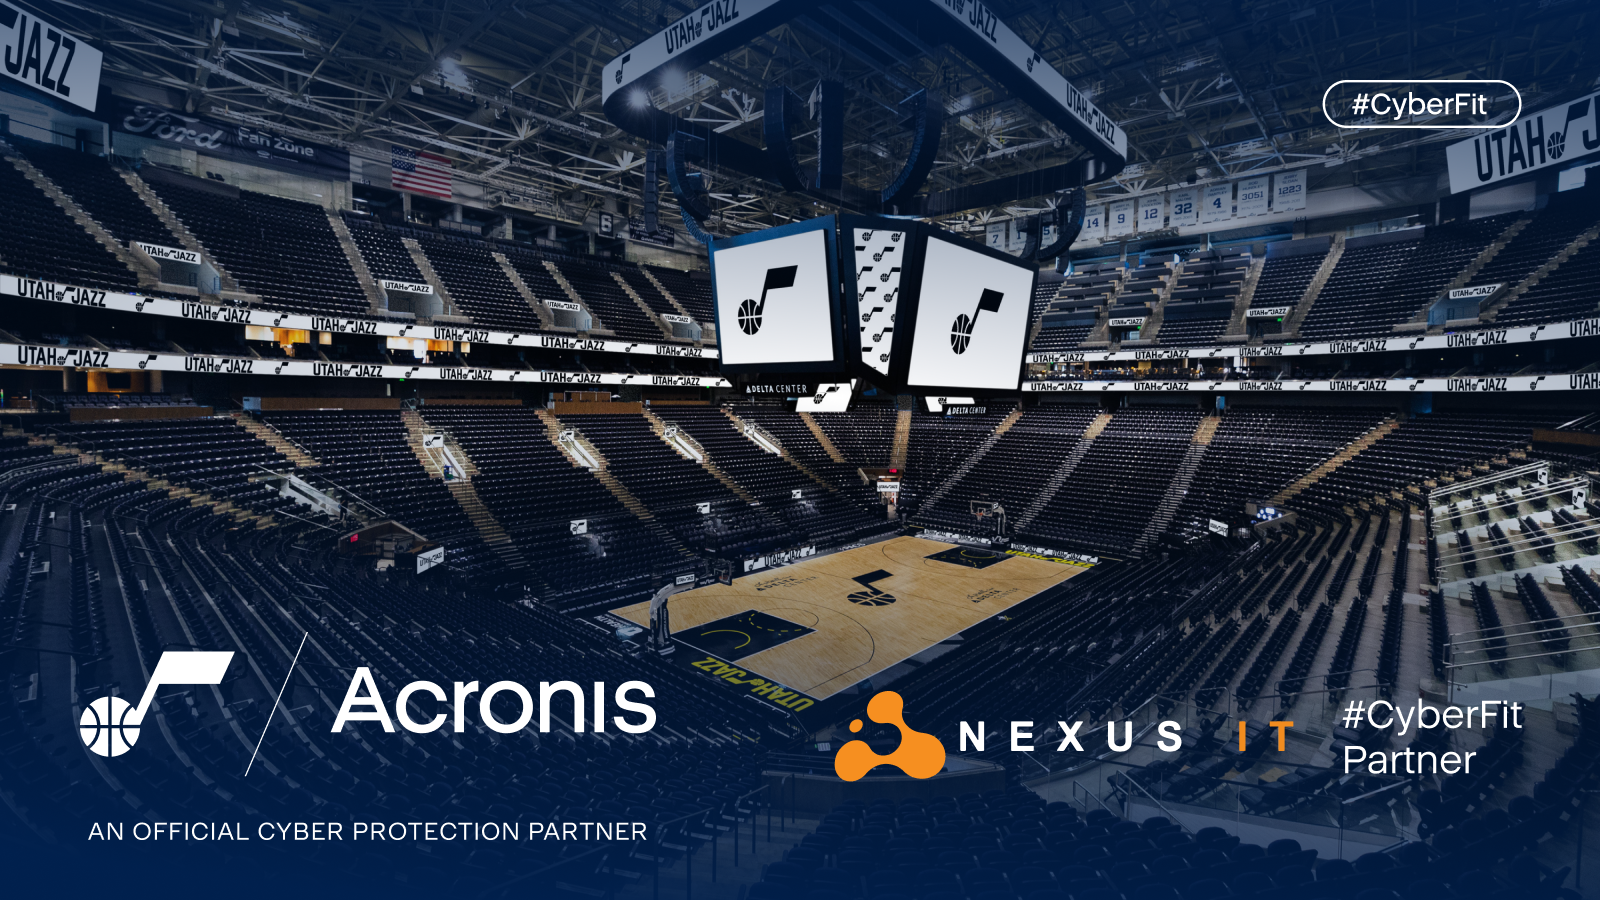 Nexus IT, a renowned provider of exceptional IT support and solutions, has teamed up with Acronis, a global leader in cyber protection, to fortify the cybersecurity framework of the Utah Jazz.